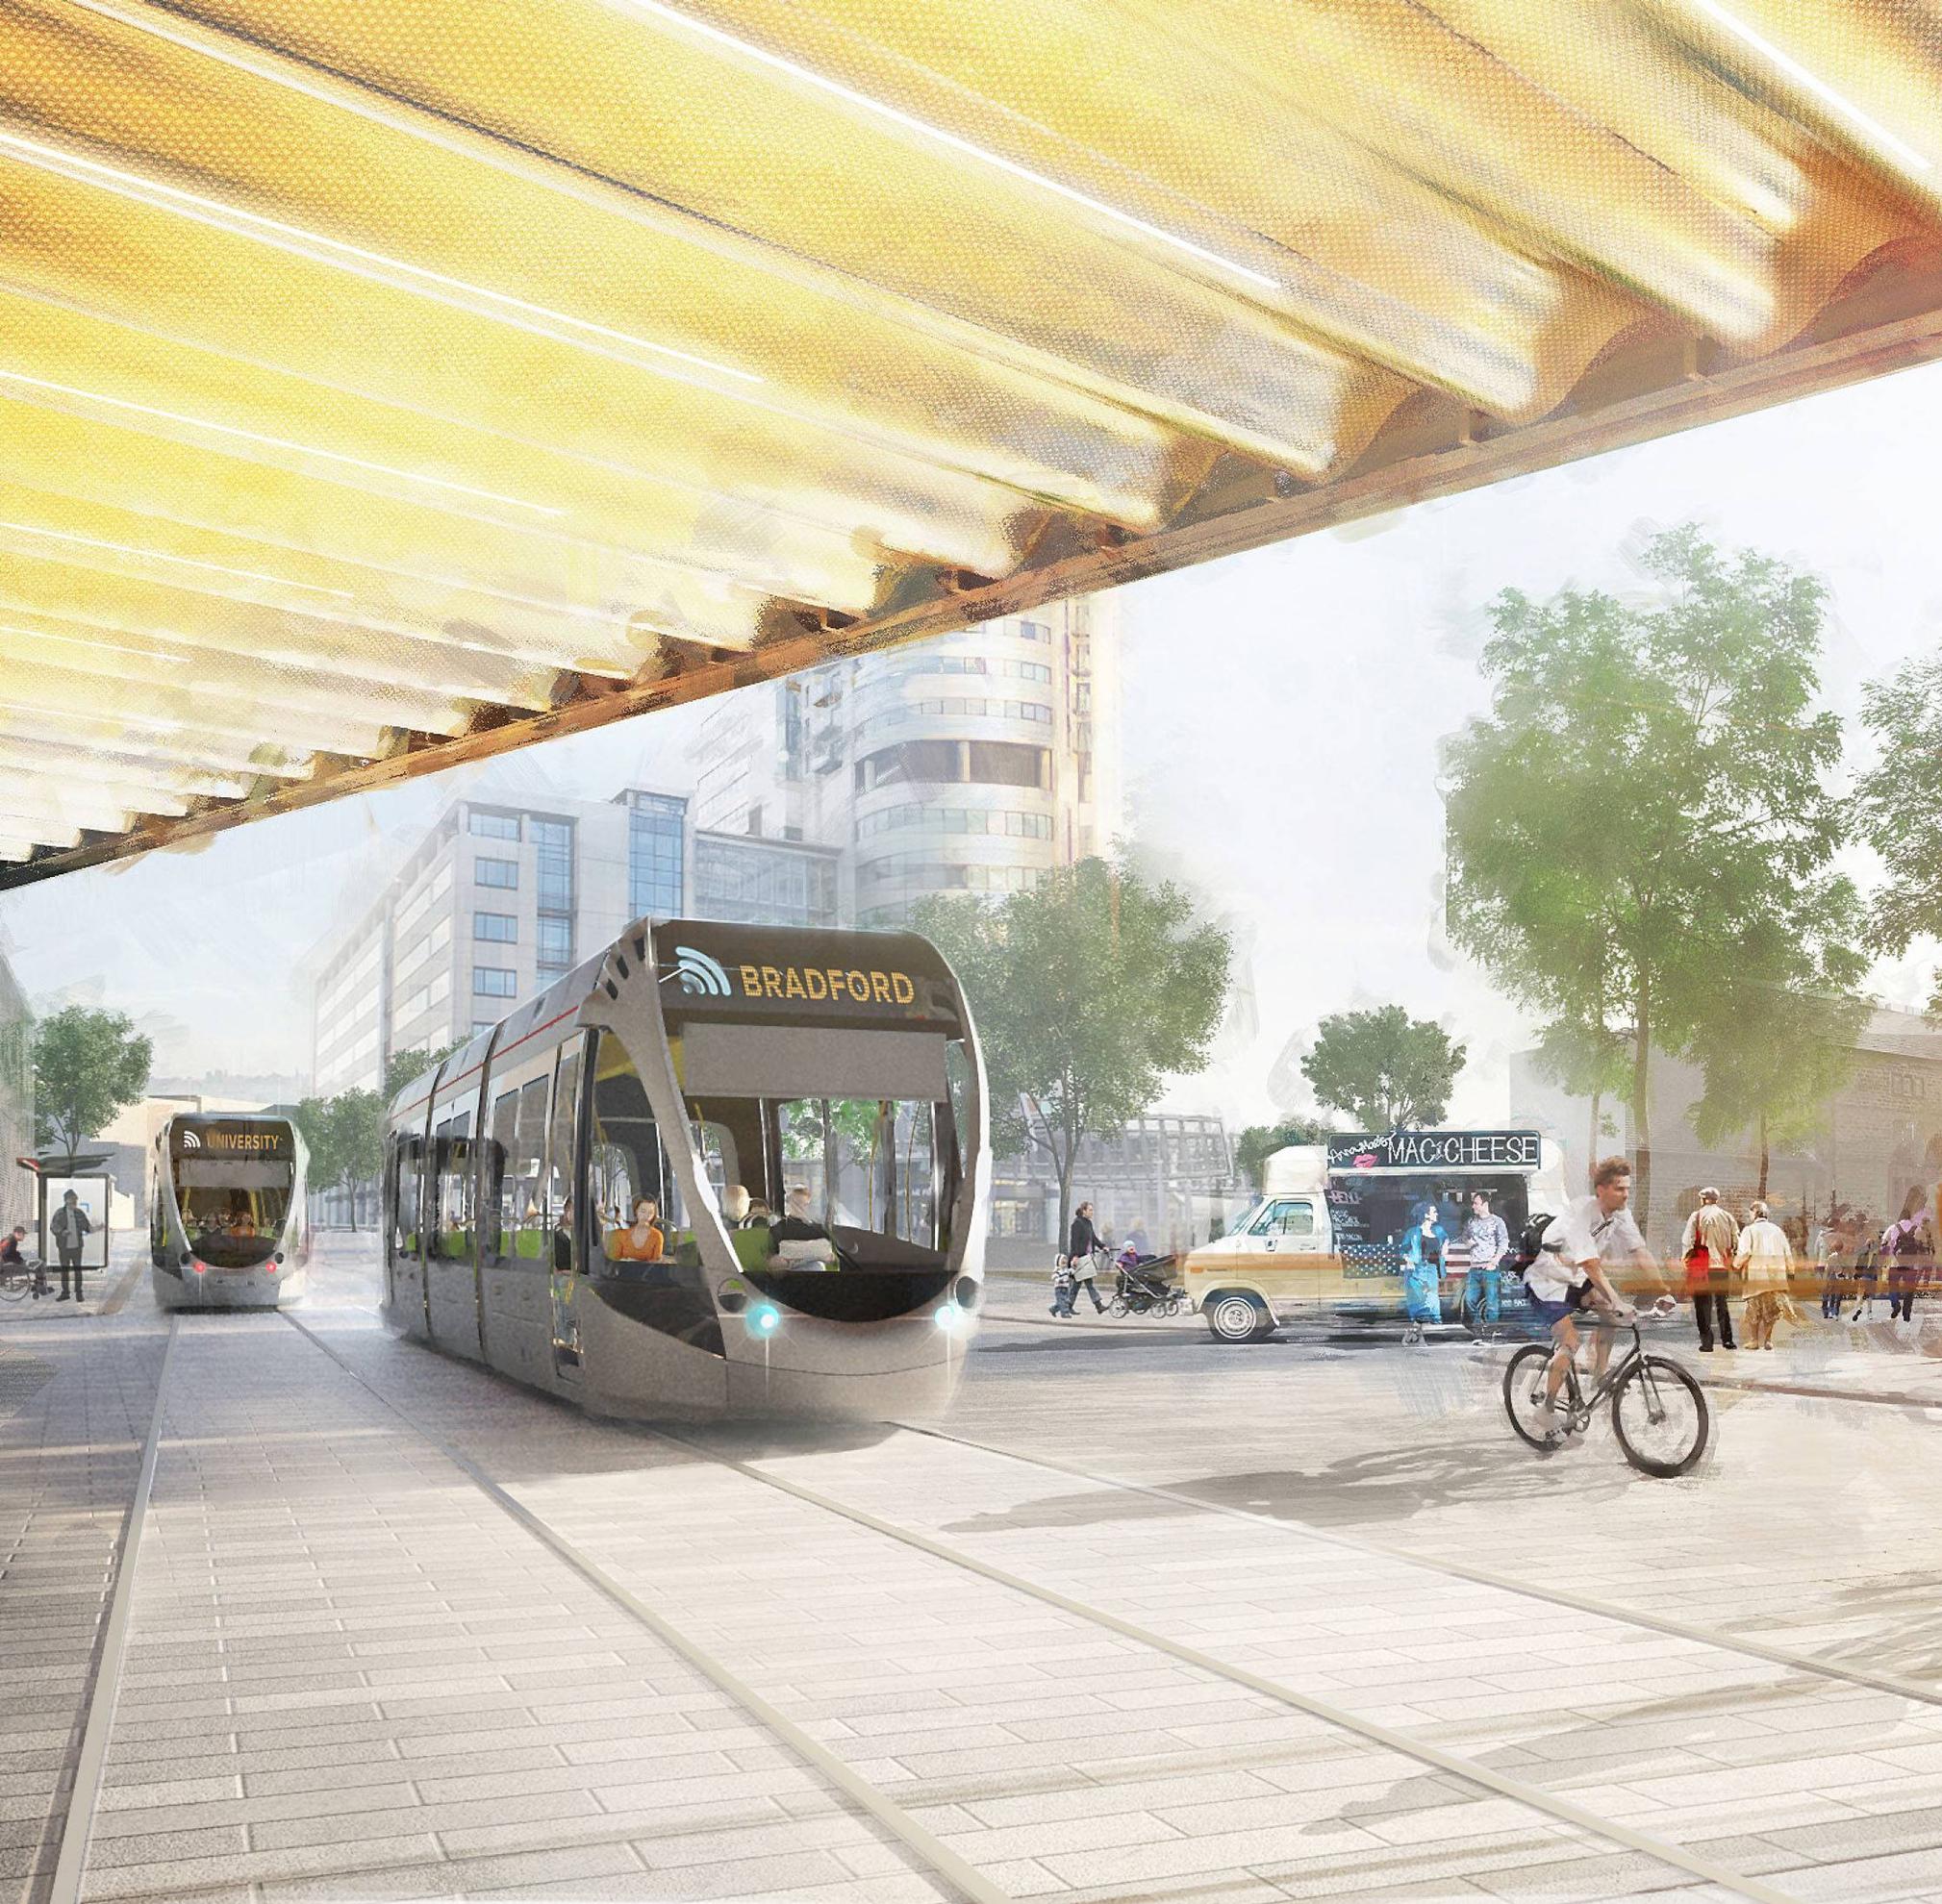 WYCA has been developing a vision for the region’s future transport system, including a new, high quality mass transit system